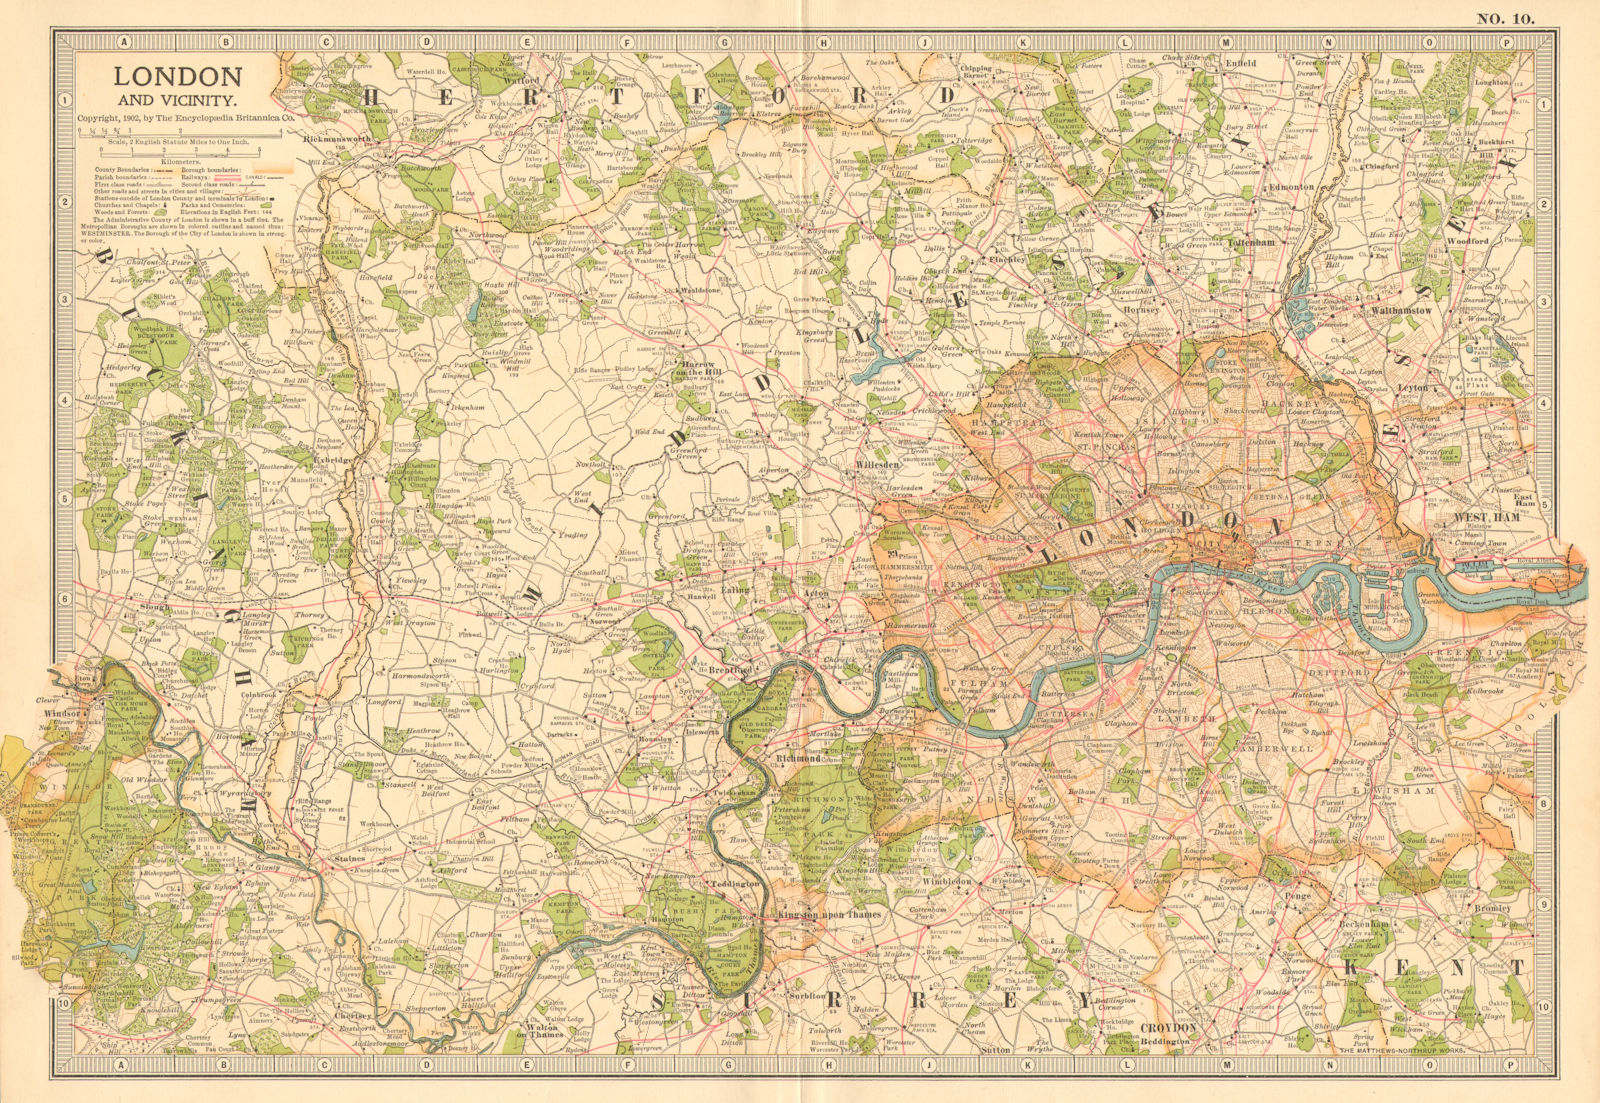 LONDON & VICINITY.Thames valley. Middlesex Surrey Buckinghamshire 1903 old map